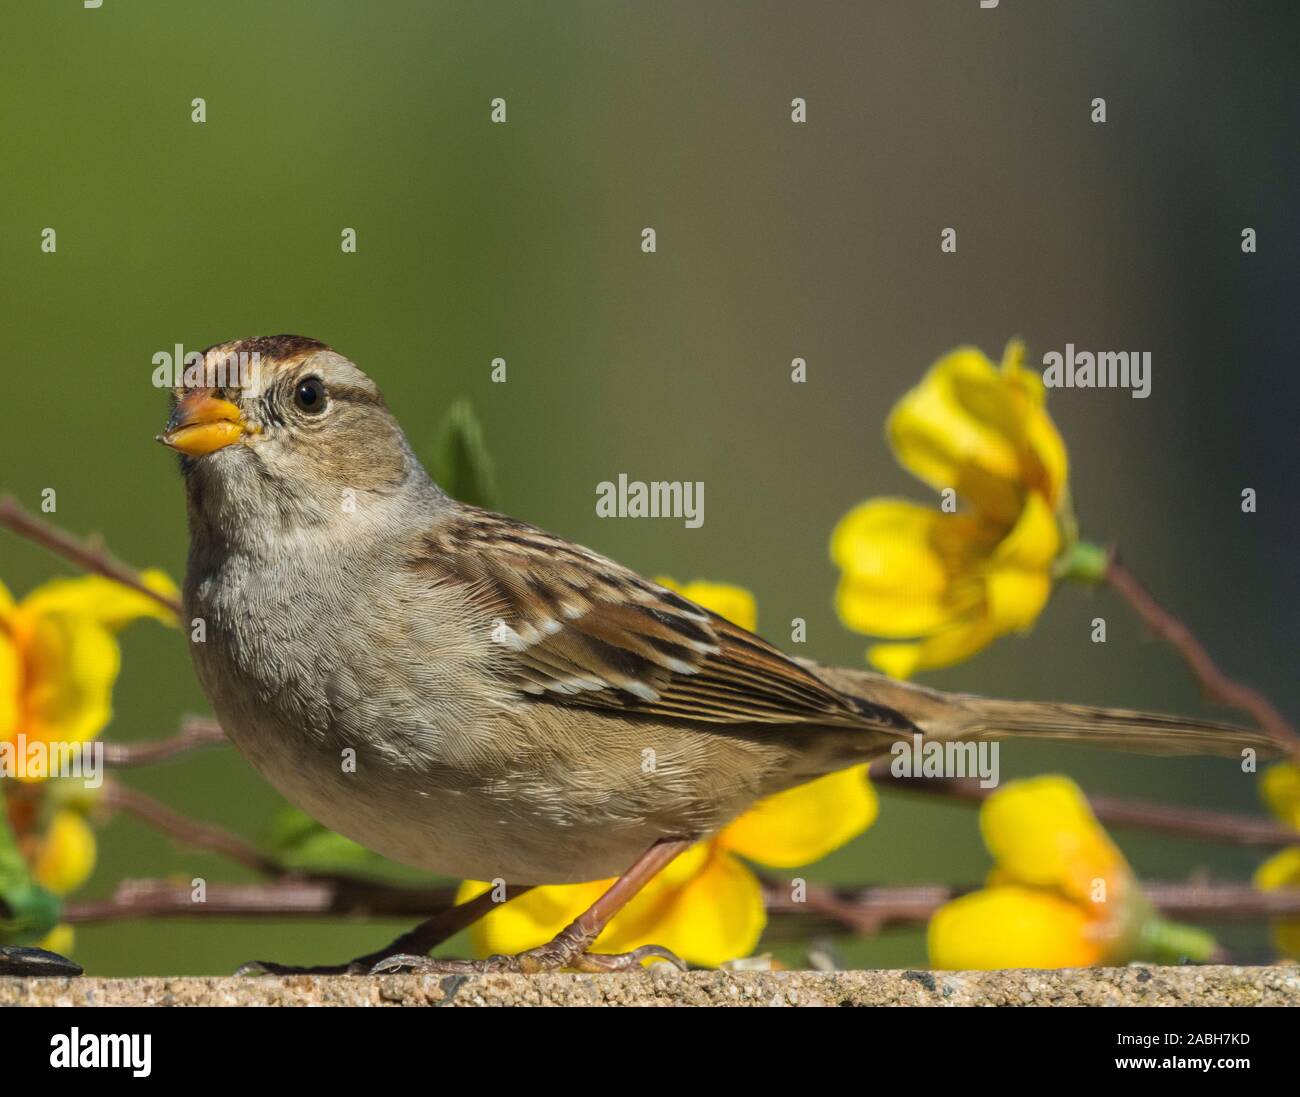 sparrow on cement wall with flowers Stock Photo